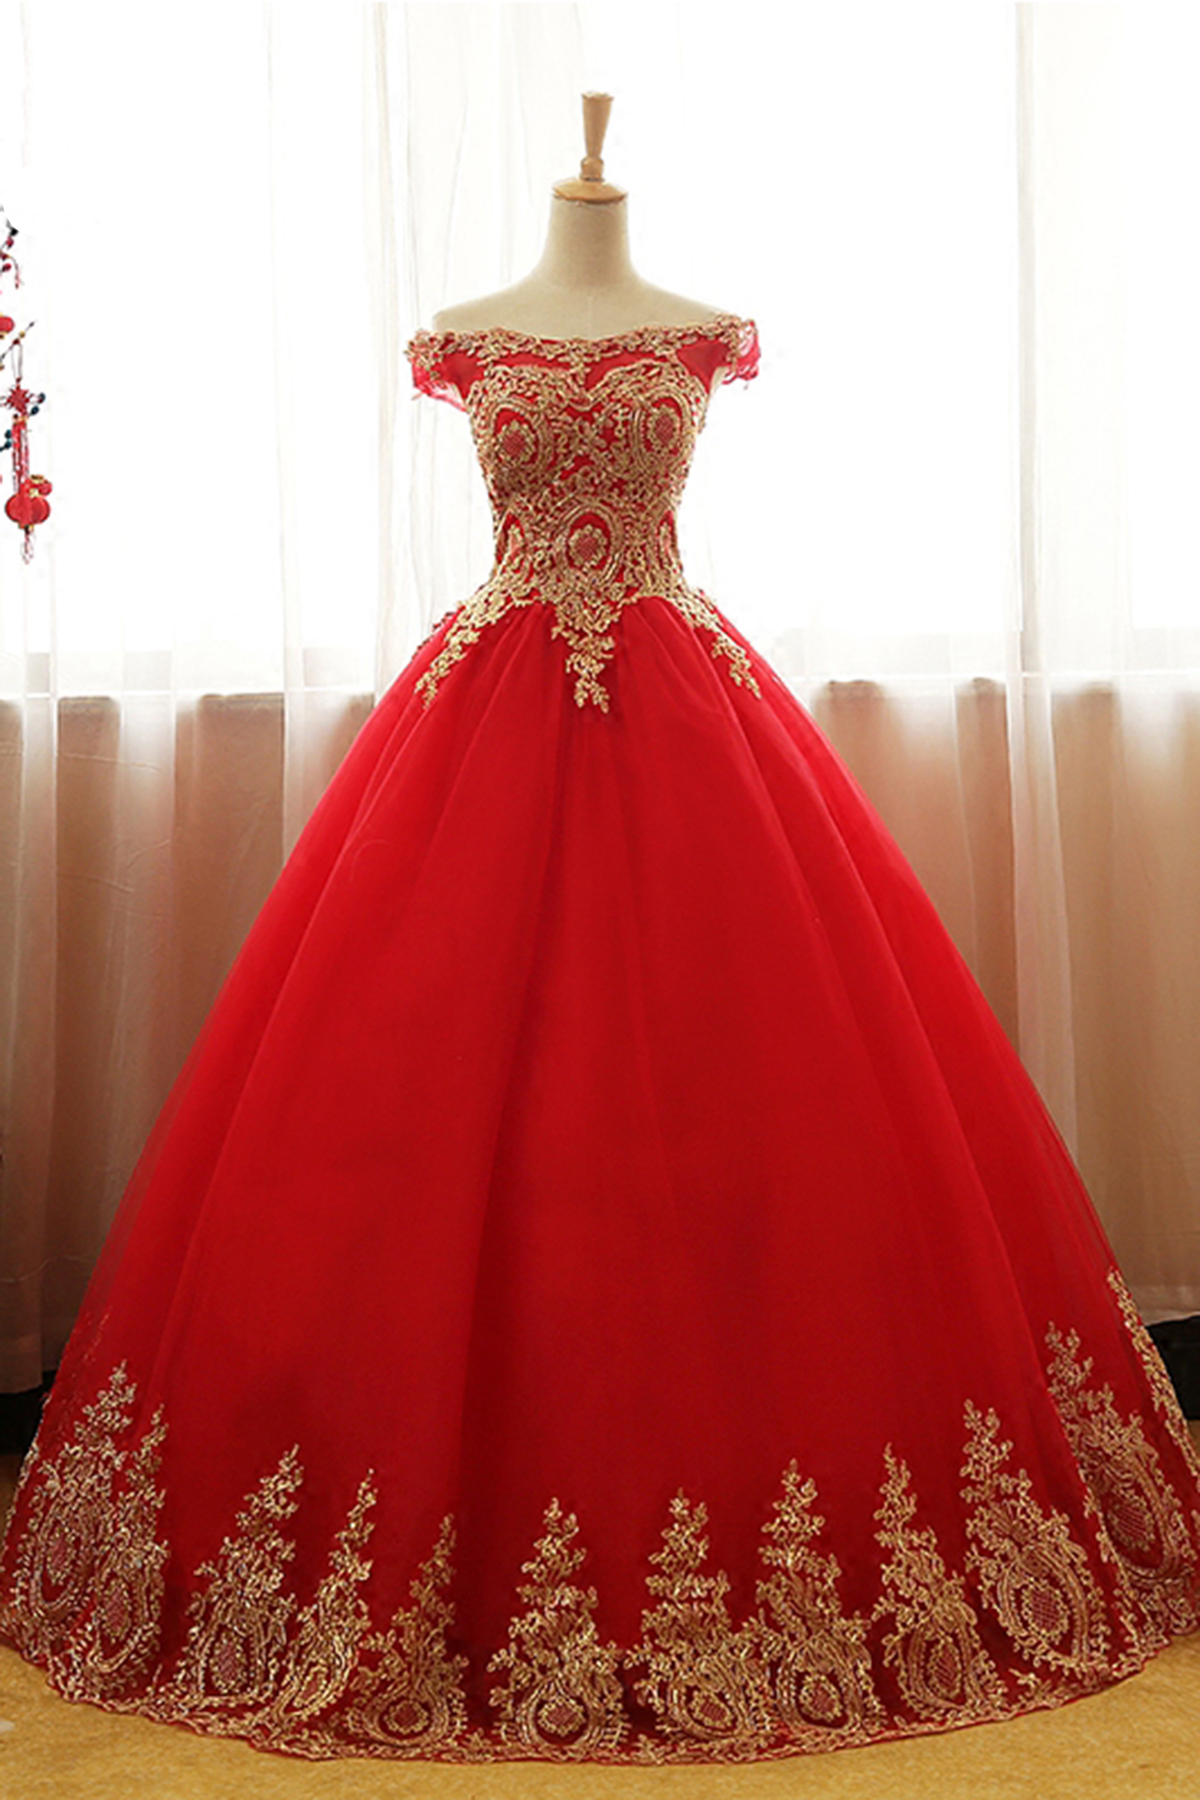 Red Tulle Ball Gown Long Party Gowns With Gold Applique, Off Shoulder Formal Dresses, Sweet 16 Party Dresses